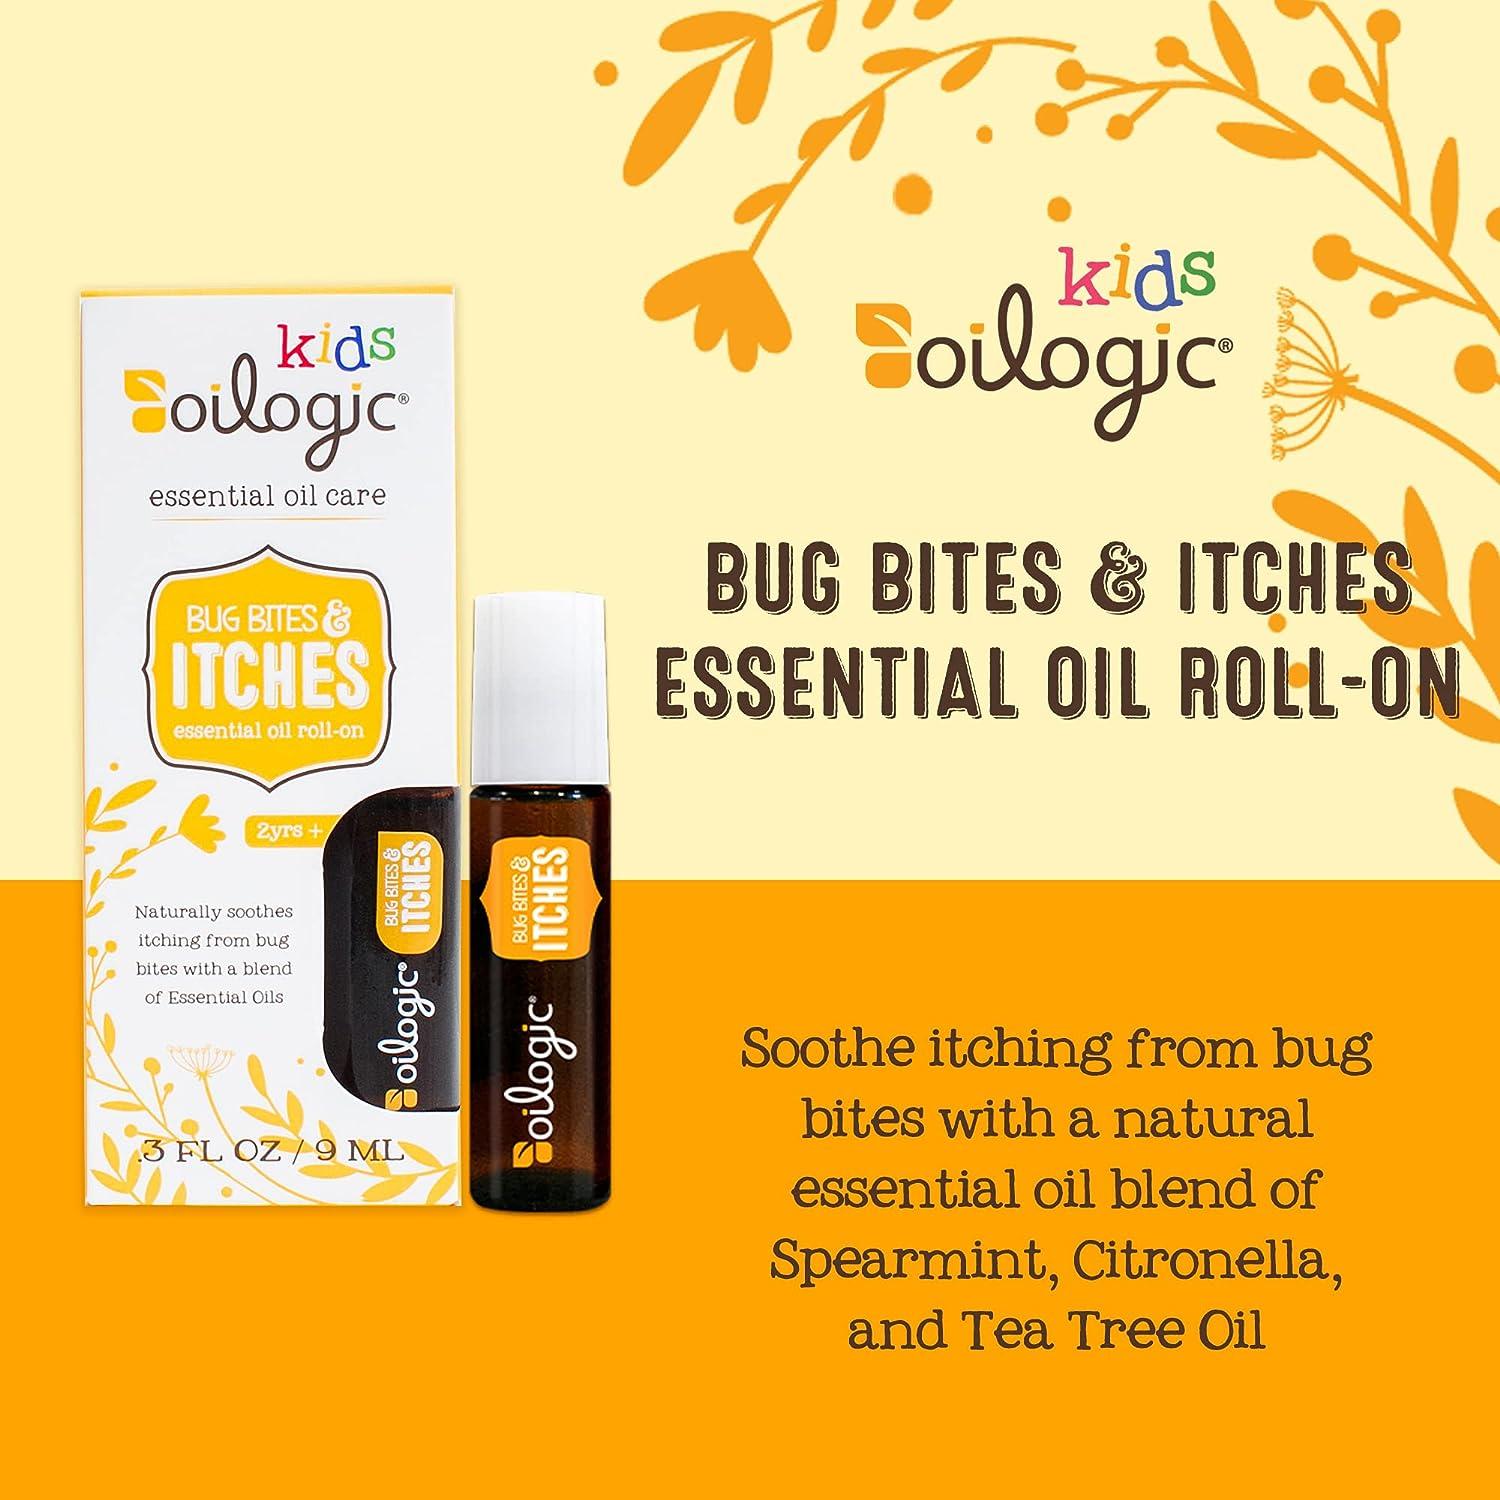 Oilogic Kids Bug Bites & Itches Roll-On Essential Oil - Gentle & Safe  Aromatherapy Blend 100% Pure Essential Oils (Tea Tree Citronella &  Spearmint Oil) Diluted with Castor & Jojoba Oil for